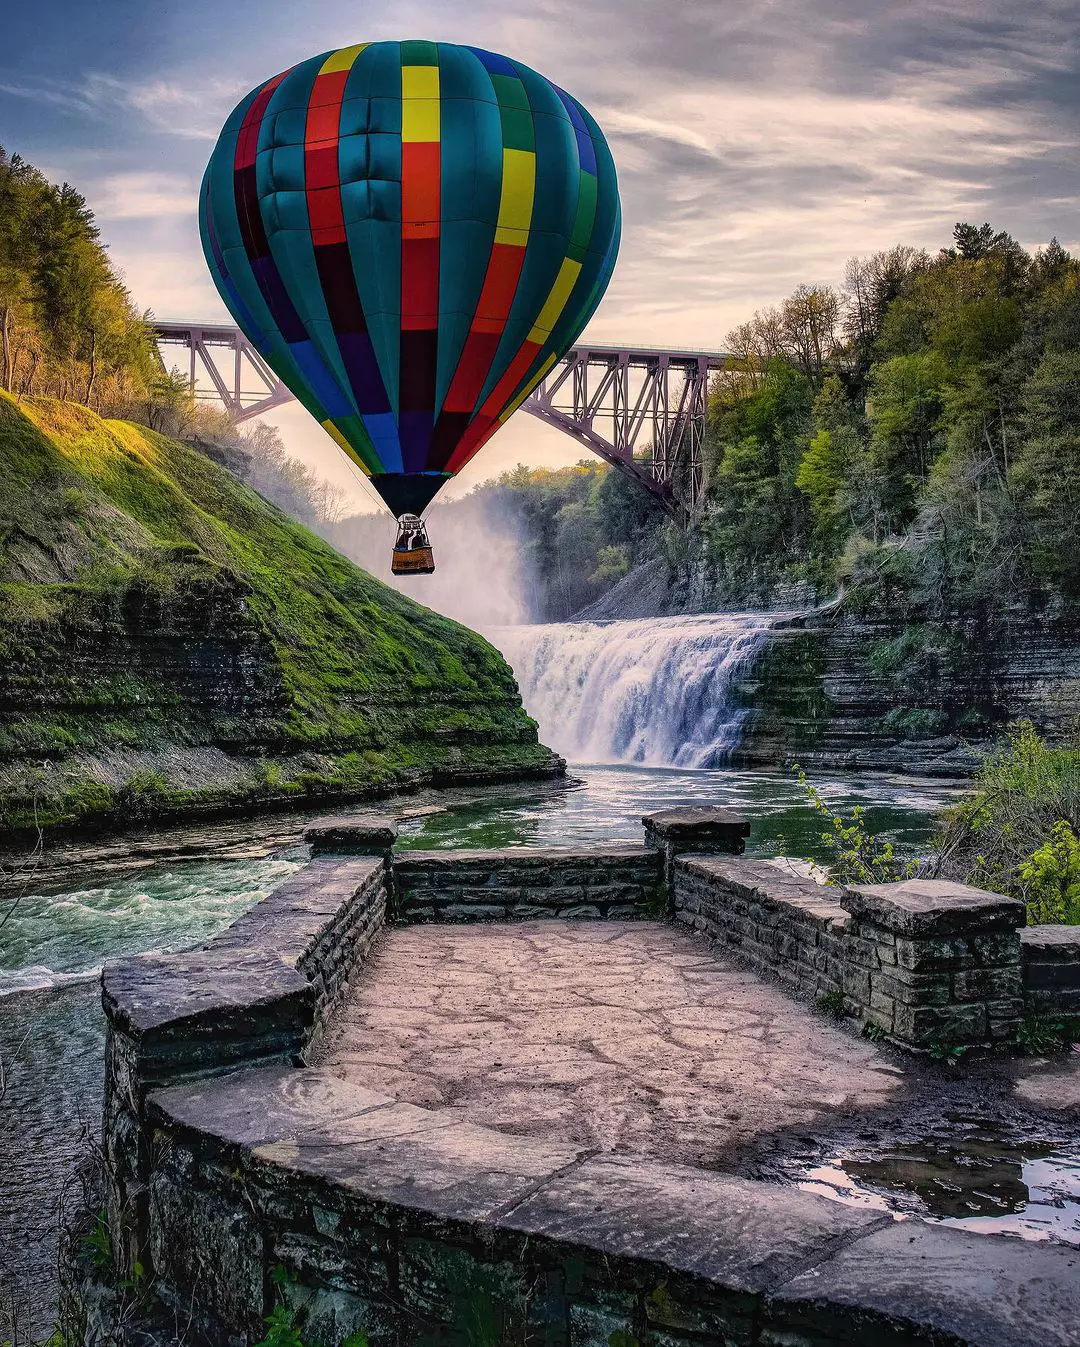 Hot air ballon ride around Letchworth State Park (photo by @photos_by_jserio)